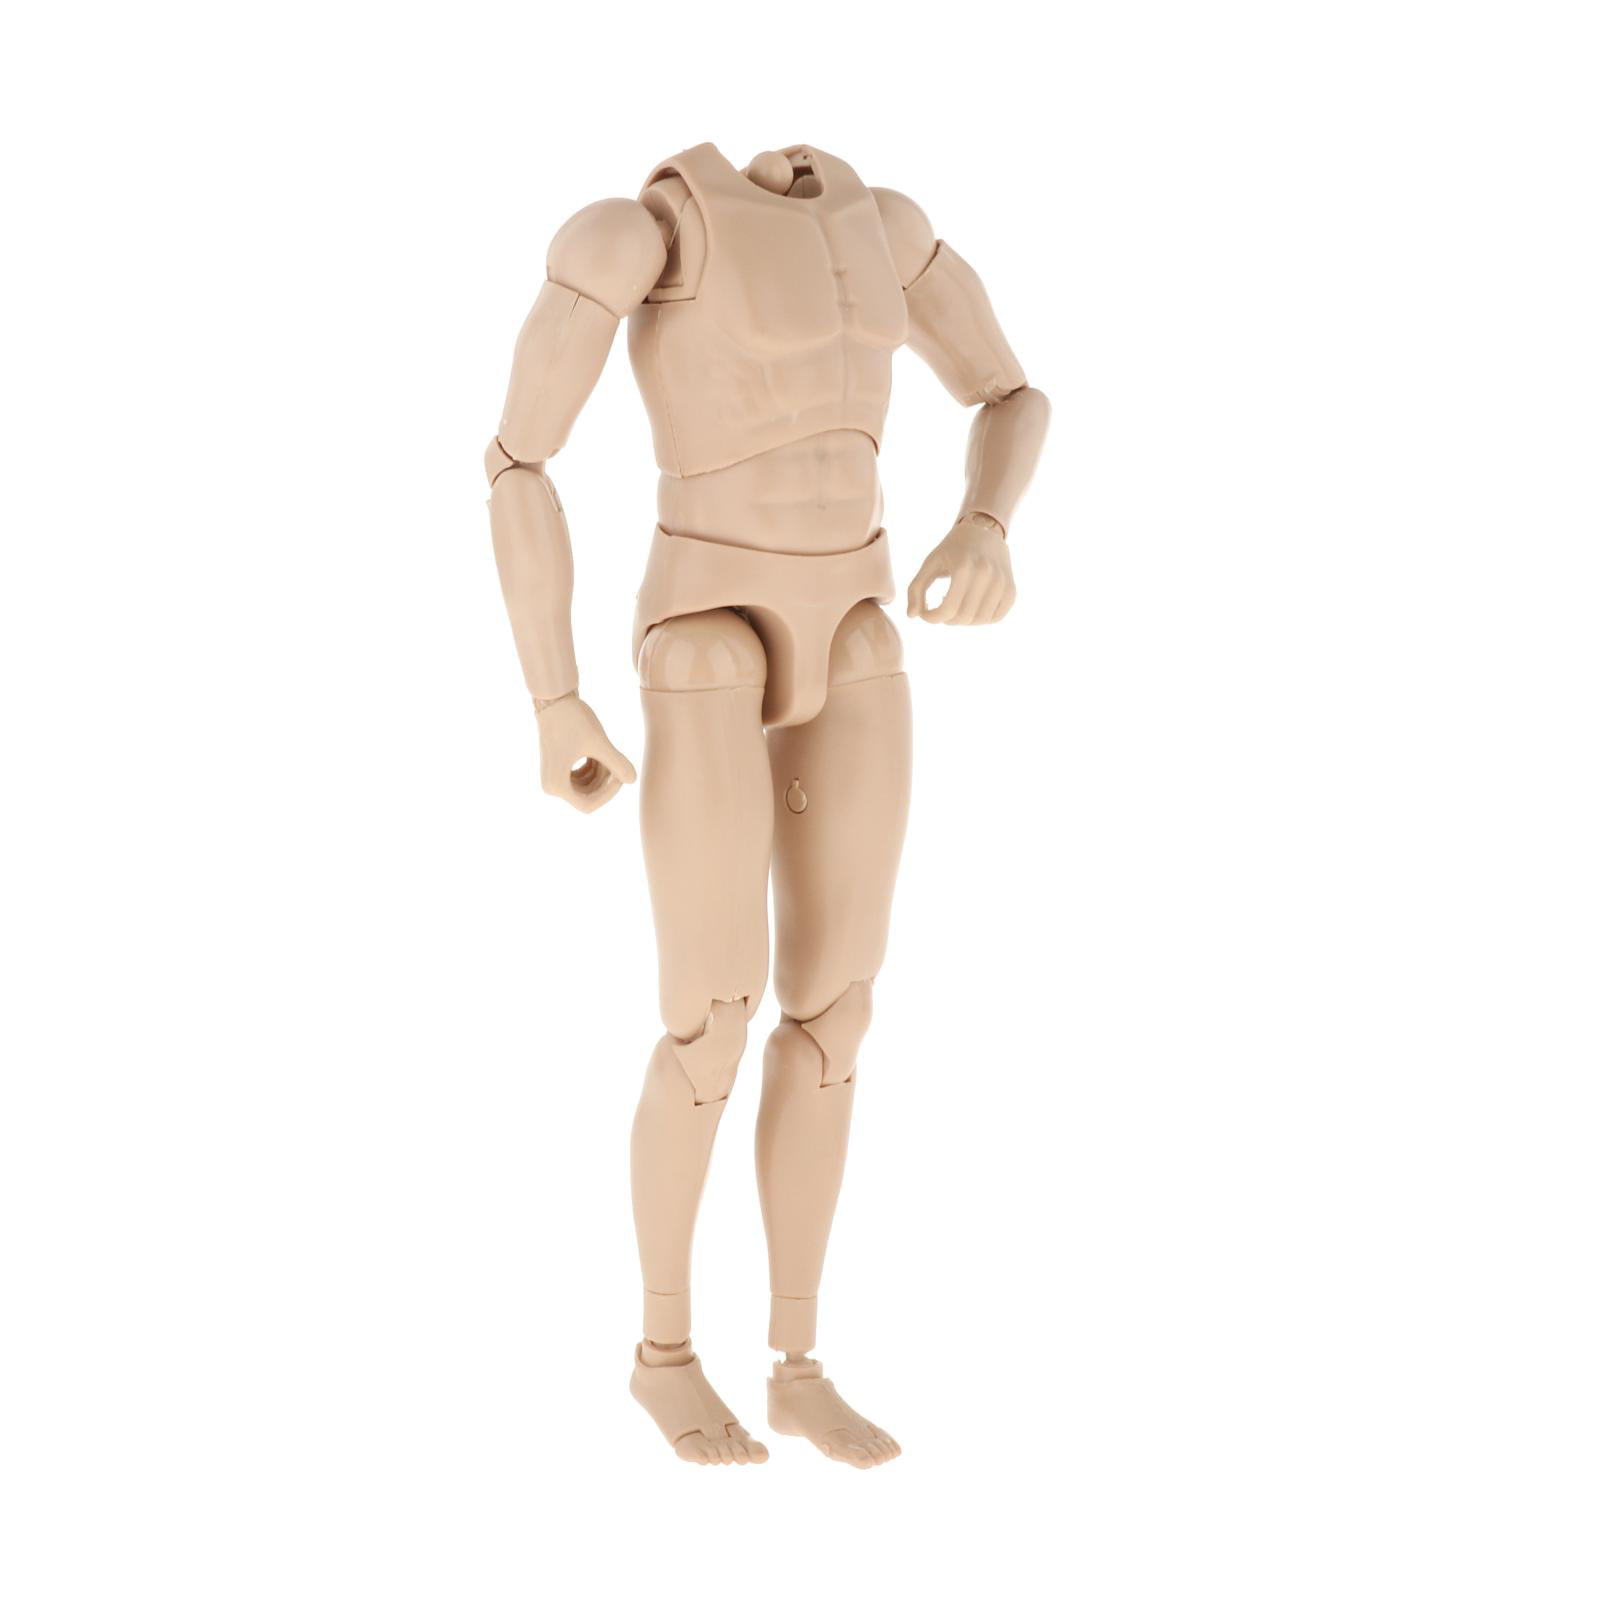 1/6 Scale Super Flexible Seamless Male Naked Body Wheat Skin Action Figure 